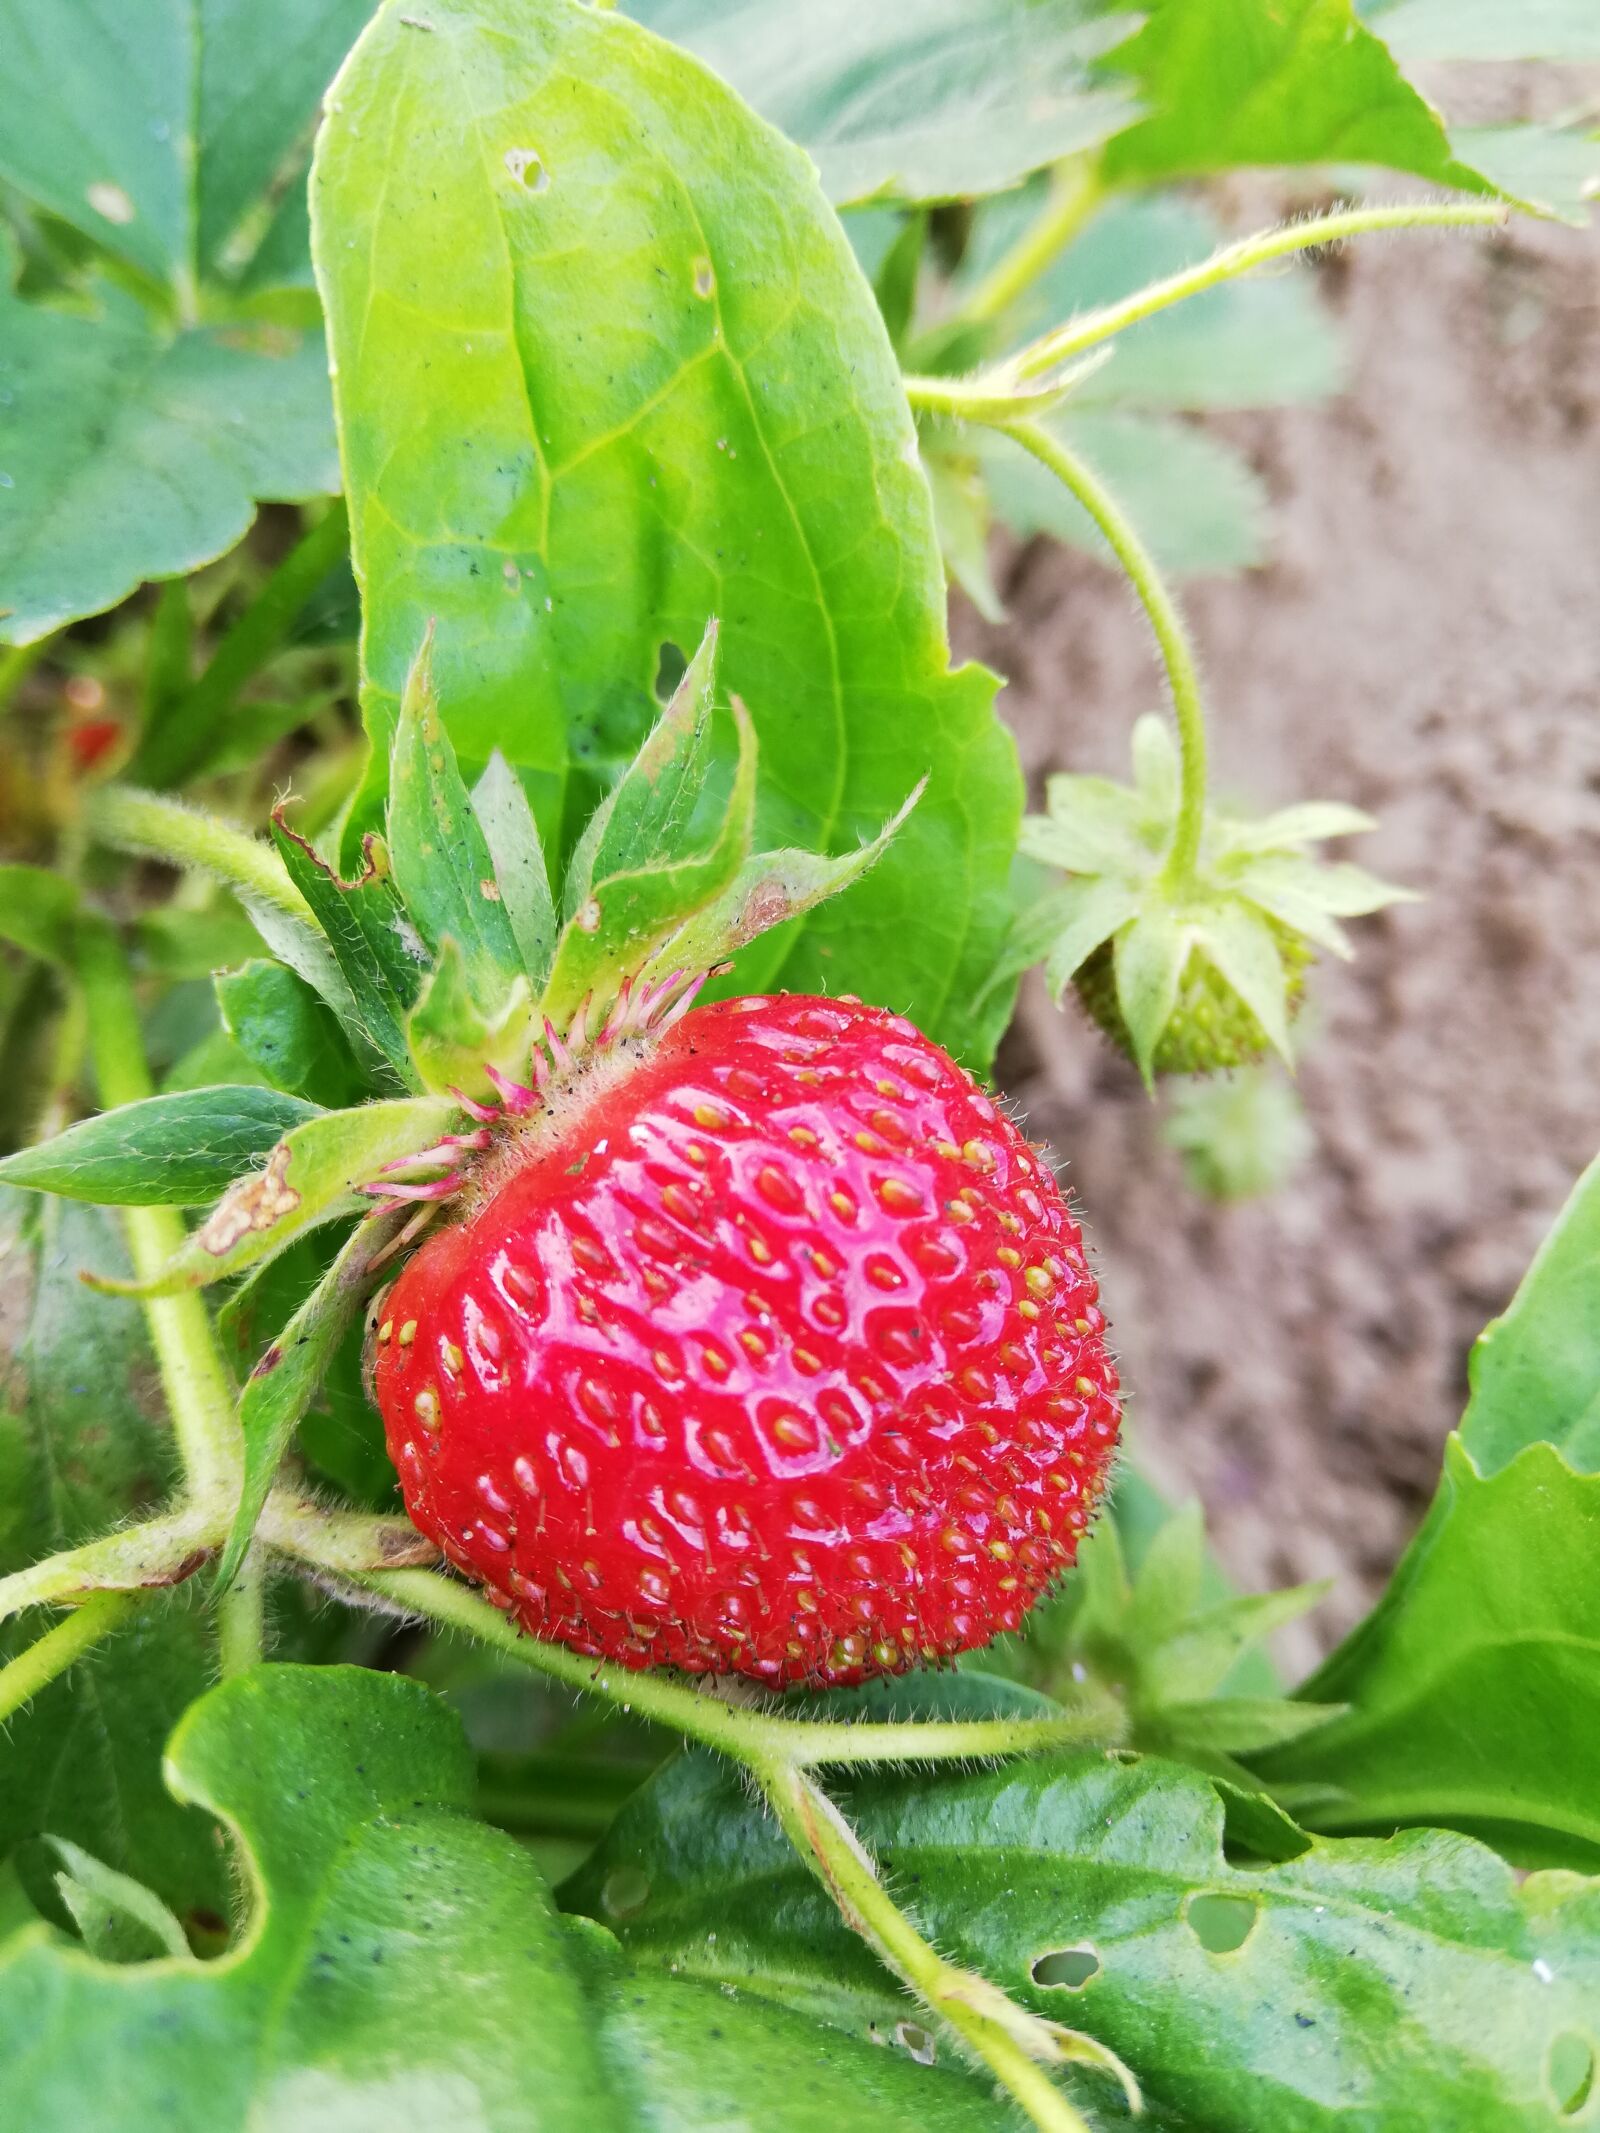 HUAWEI P20 lite sample photo. Strawberry, berry, red photography